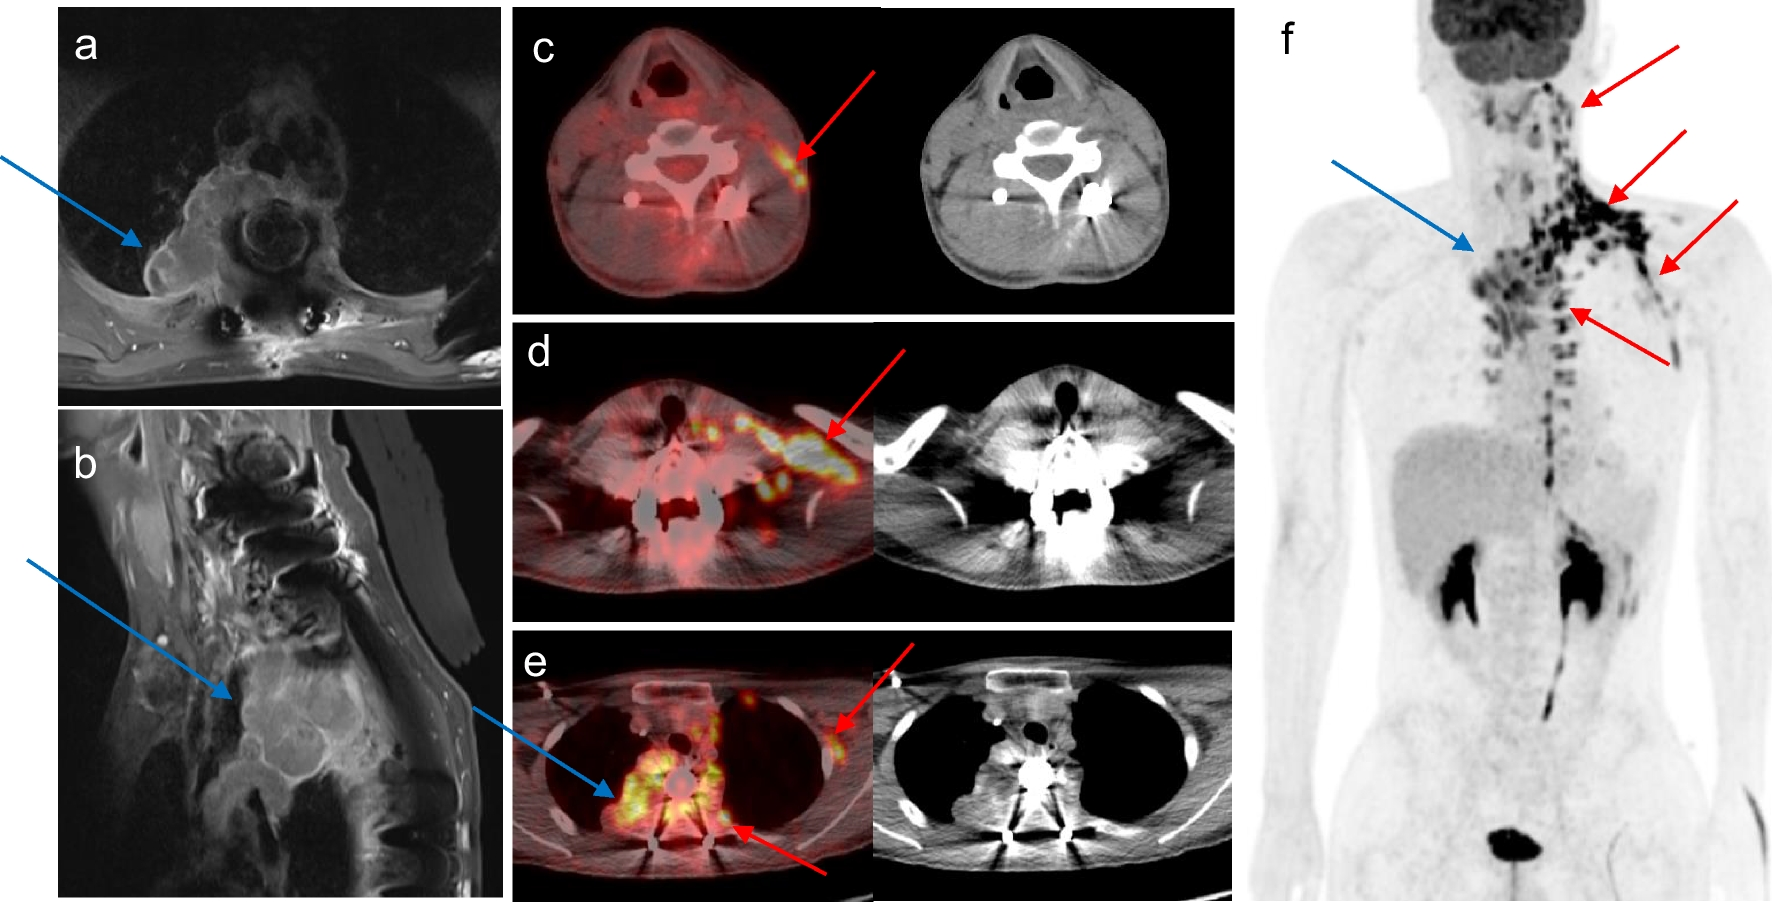 Unilateral Increased Brown Fat Activities on 18F-FDG PET/CT in a Patient with Contralateral Anhidrosis After Surgical Treatment of Metastatic Osteosarcoma in the Upper Thoracic Spine